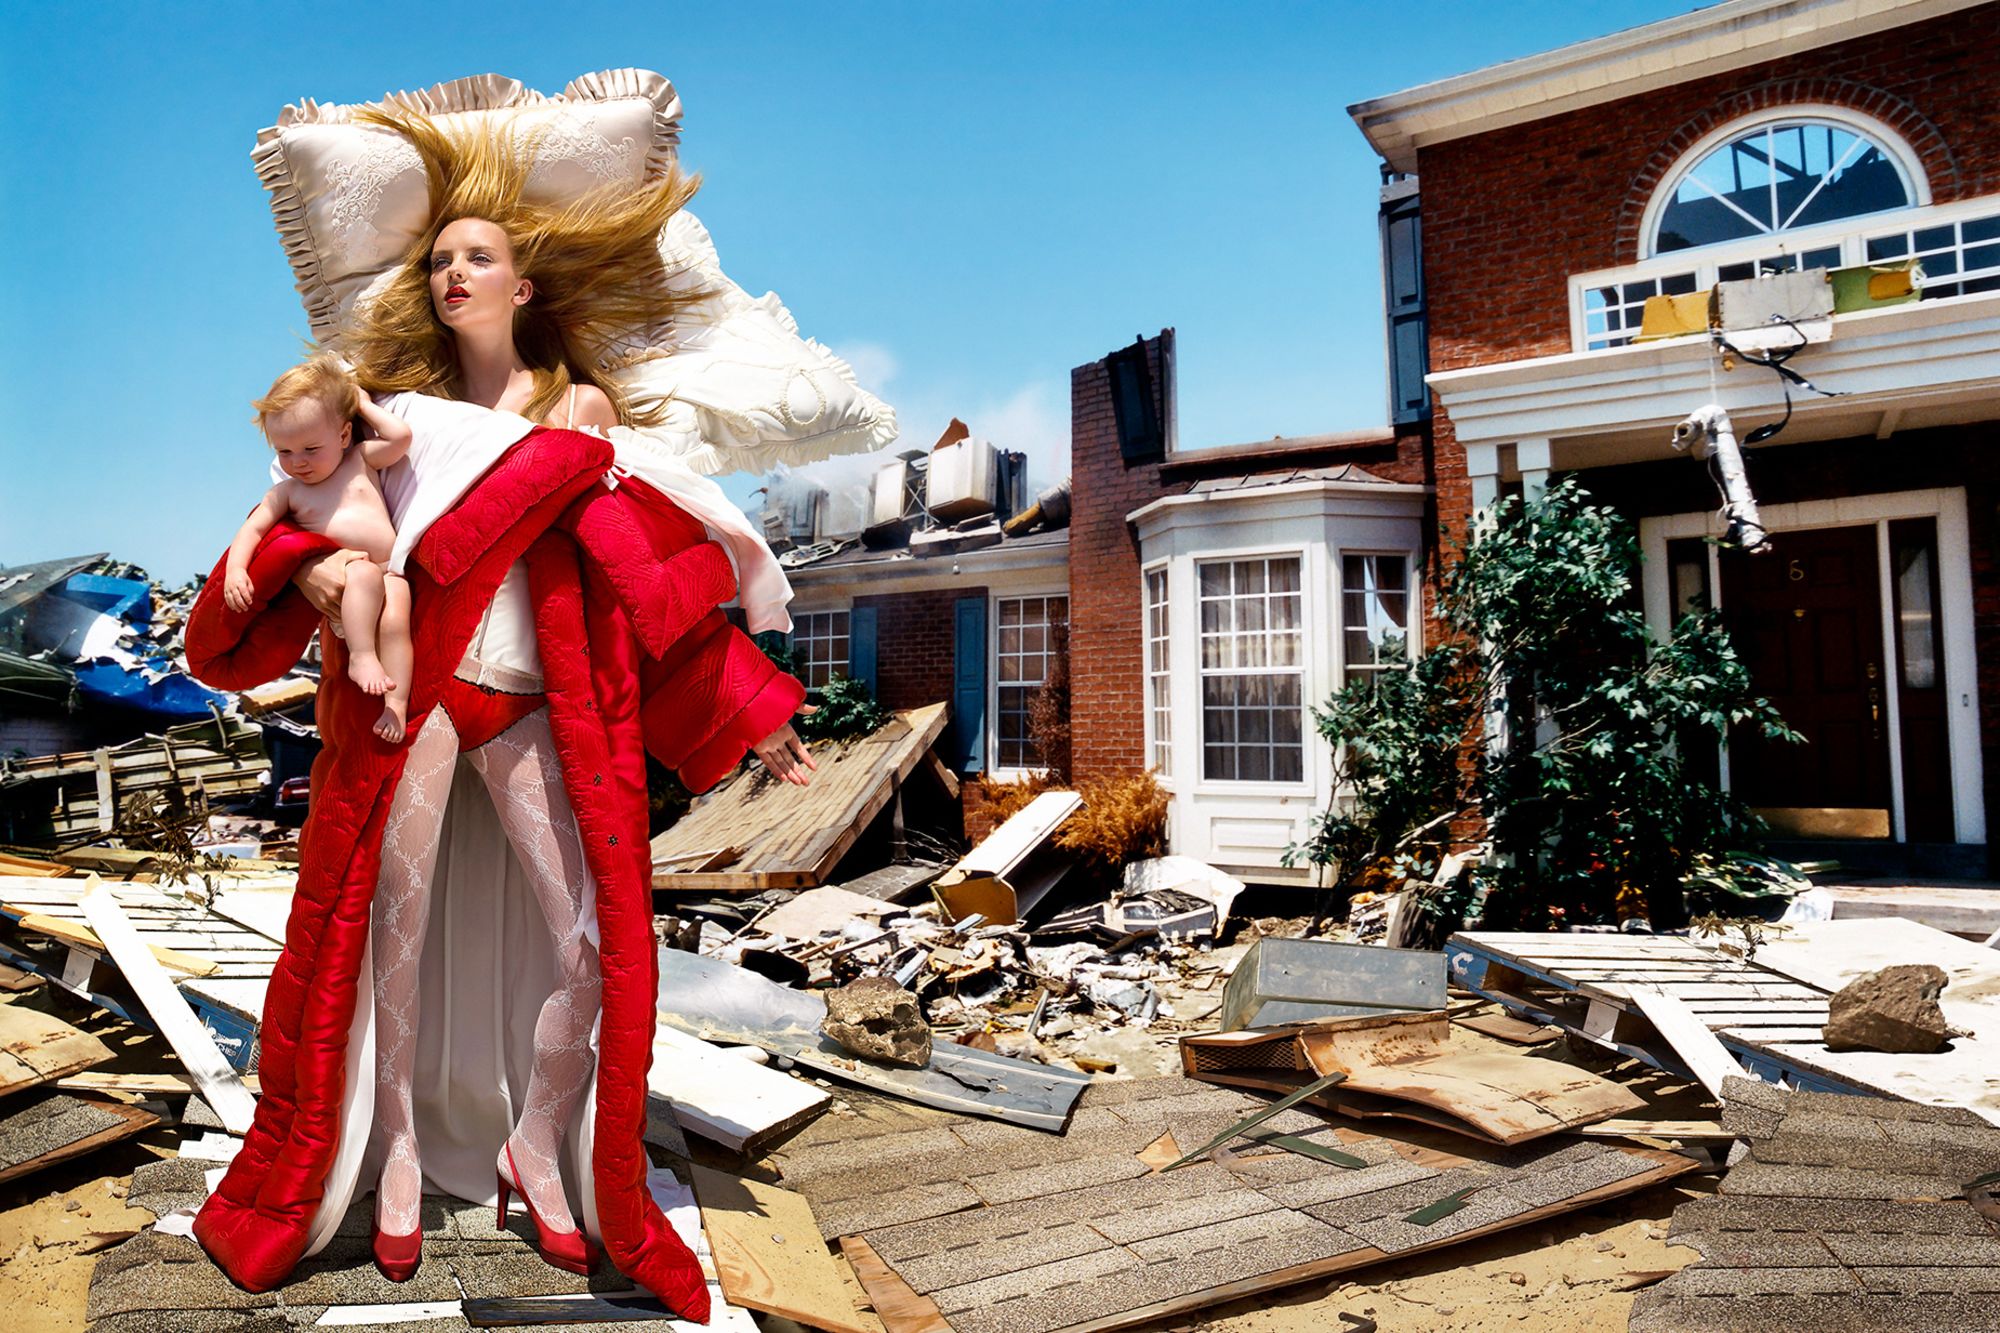 “The House at the End of the World” marked a turning point in David LaChapelle’s career.